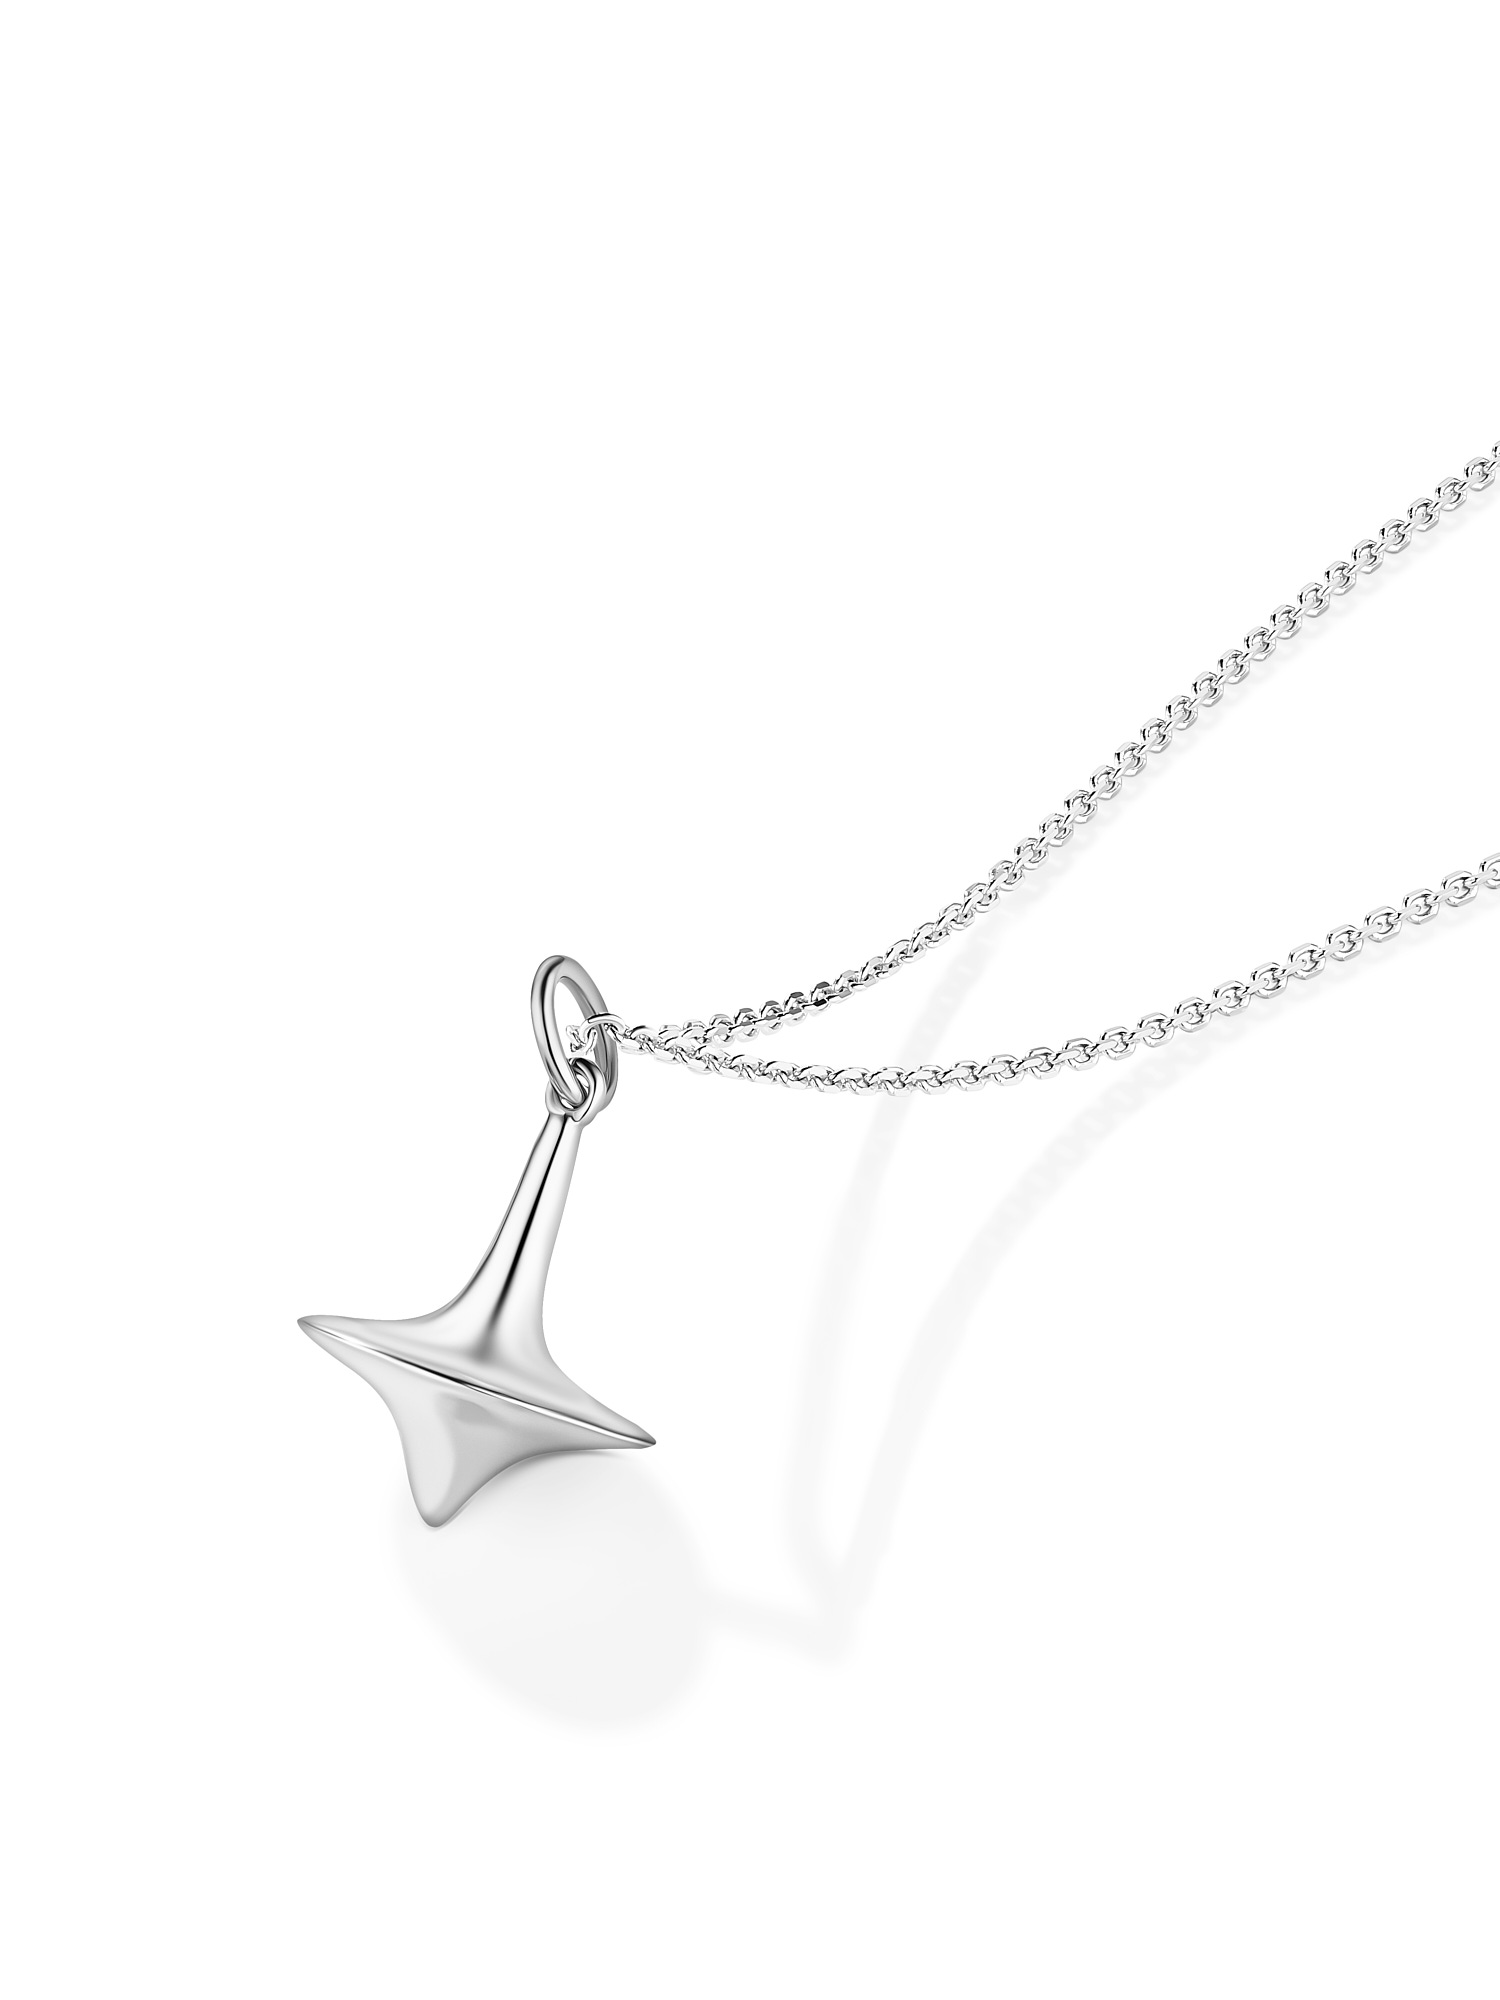 SPINNING TOP PENDANT NECKLACE  